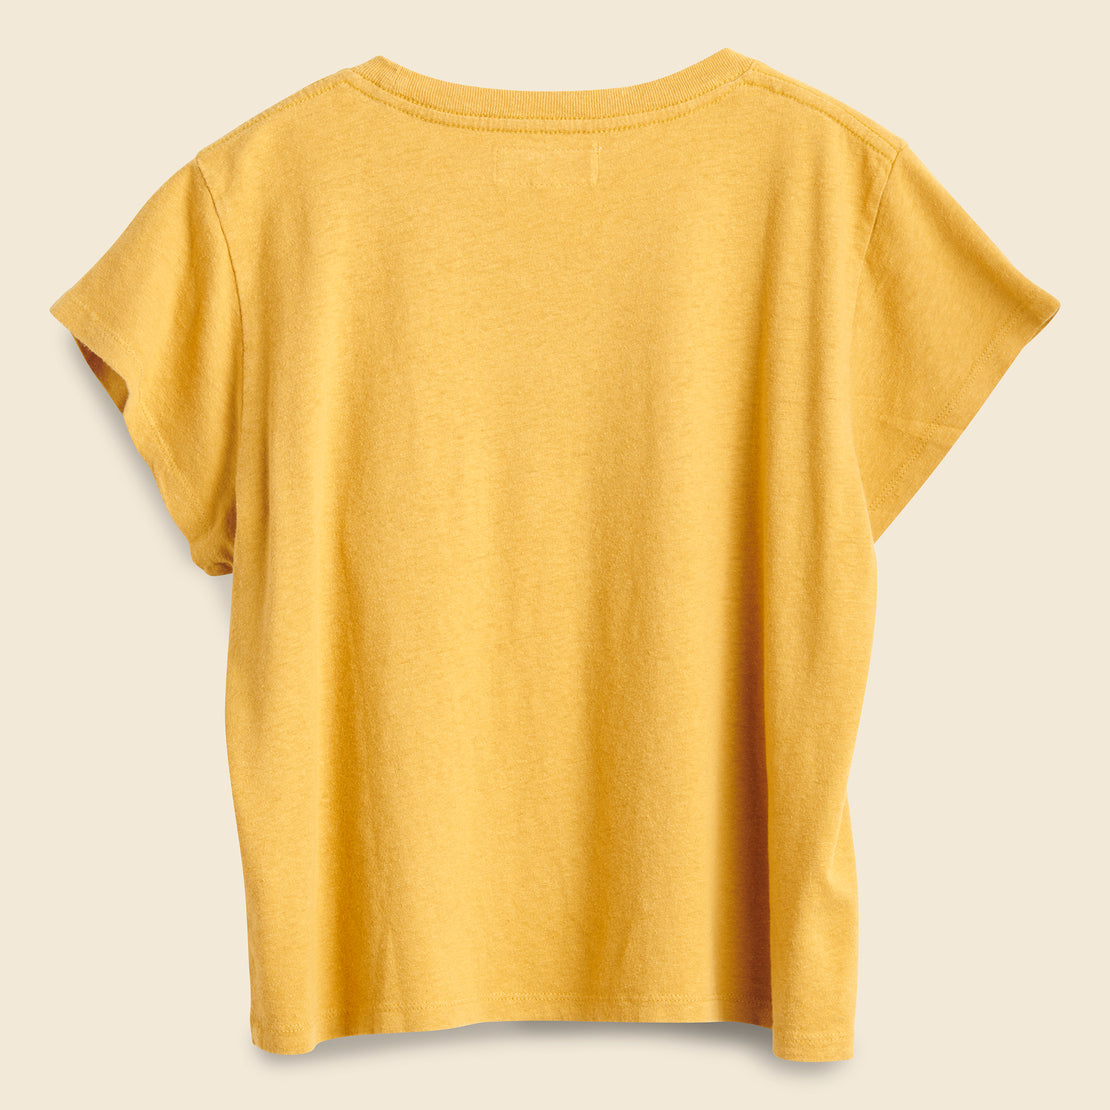 Q Tee - Mustard - Mollusk - STAG Provisions - W - Tops - S/S Tee